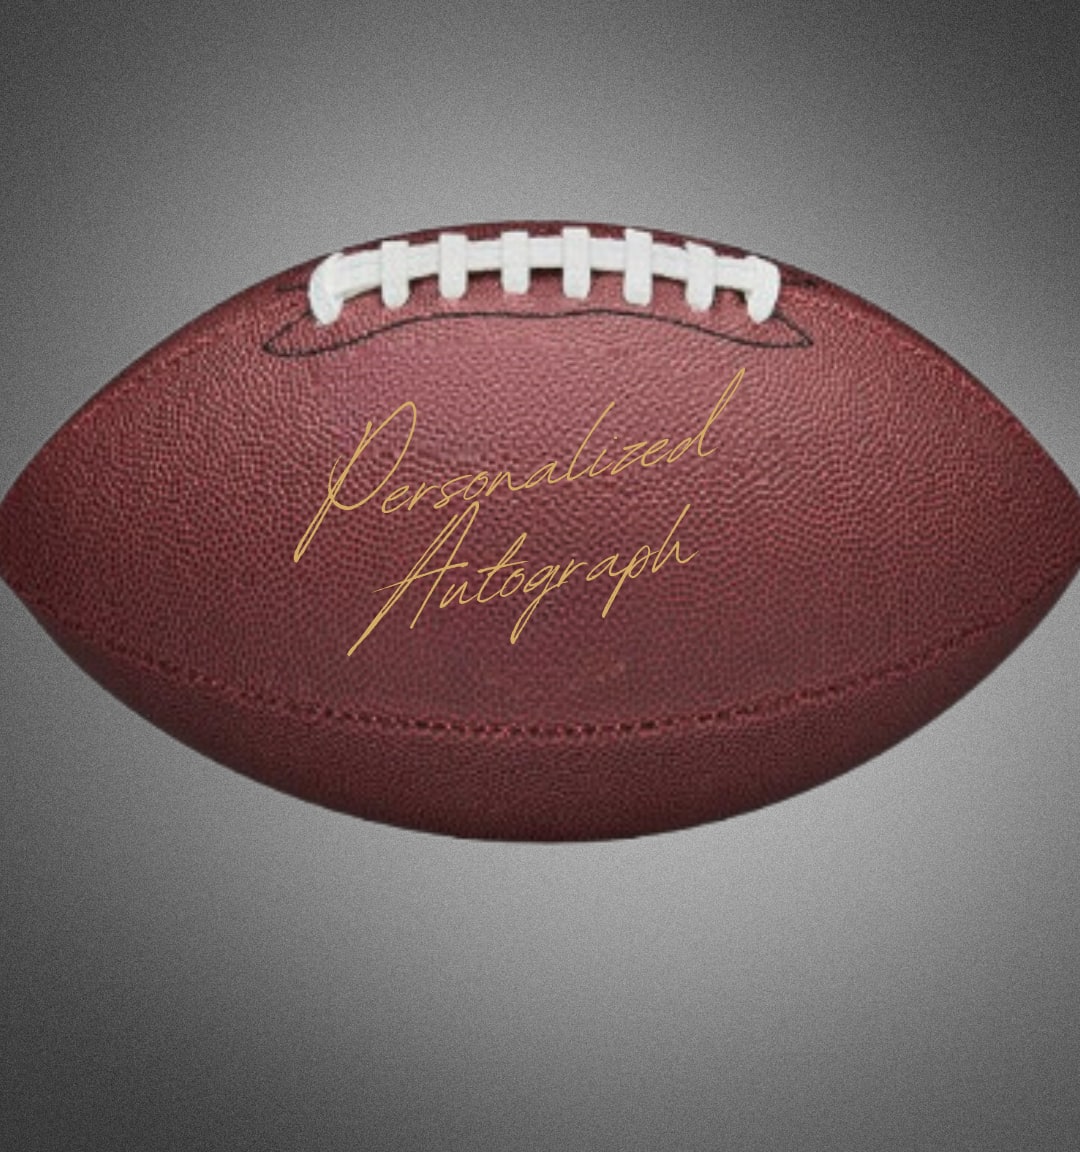 Limited Edition Mackensie Alexander Autographed Football